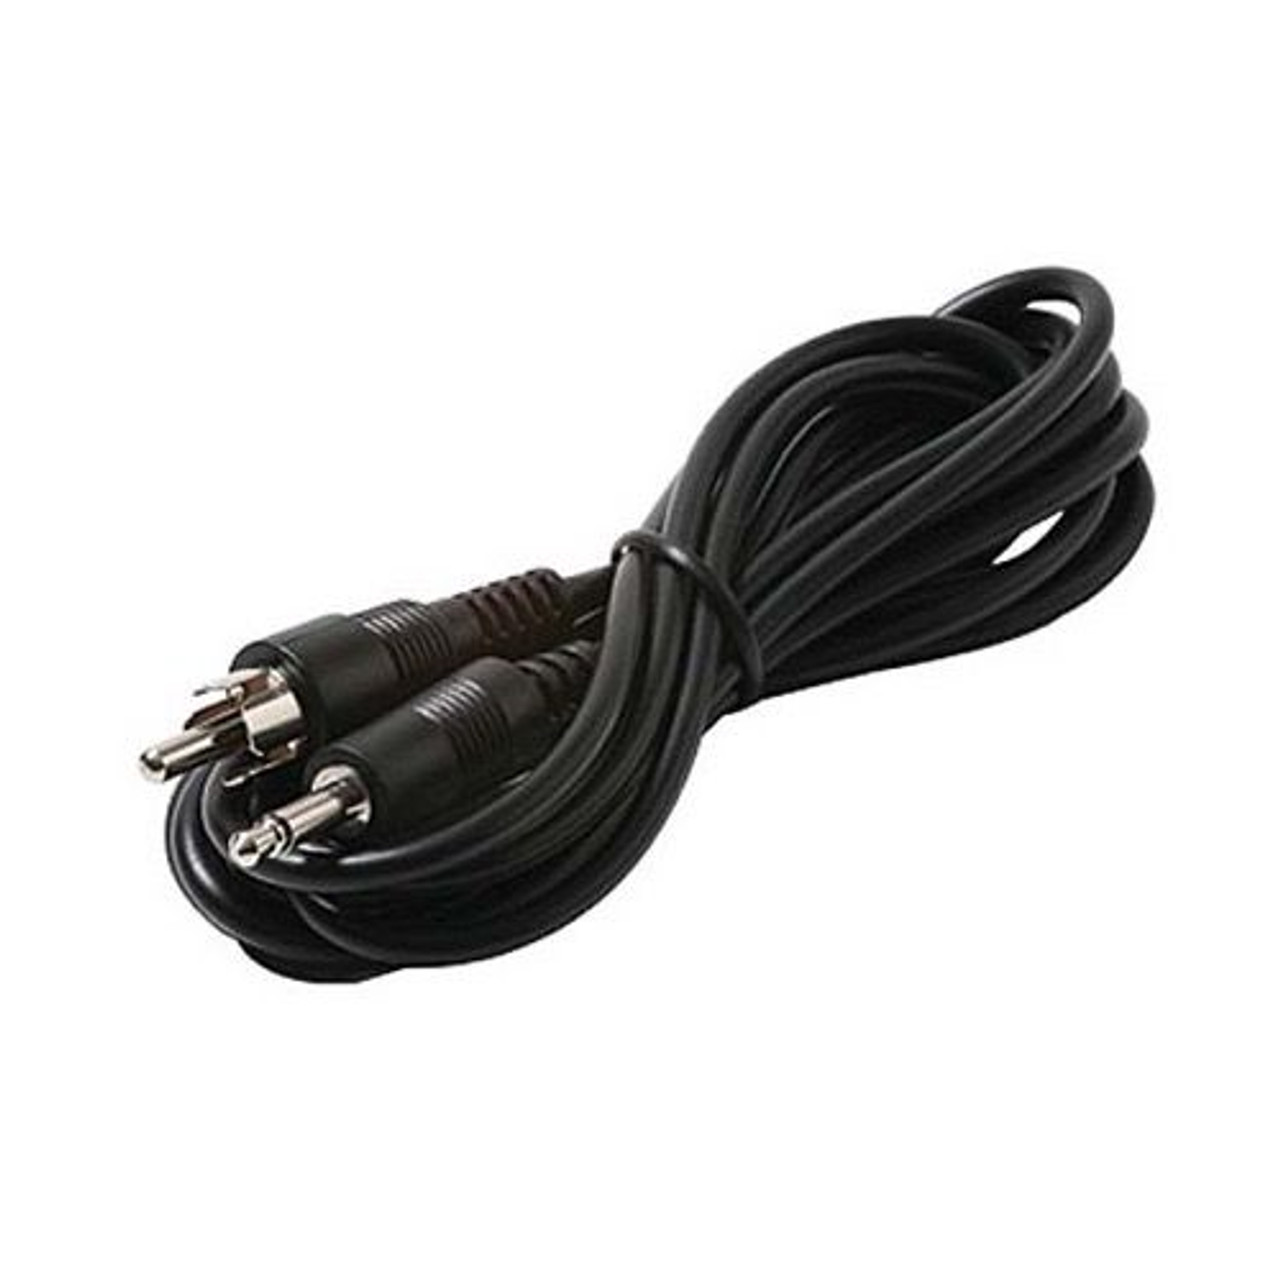 Steren 255-170 6' FT 3.5mm Male Plug Mono to RCA Male Plug Cable Audio 3.5 mm to RCA Dubbing Extension Cable, Nickel Plated Contacts for Improved Performance, Part # 255170